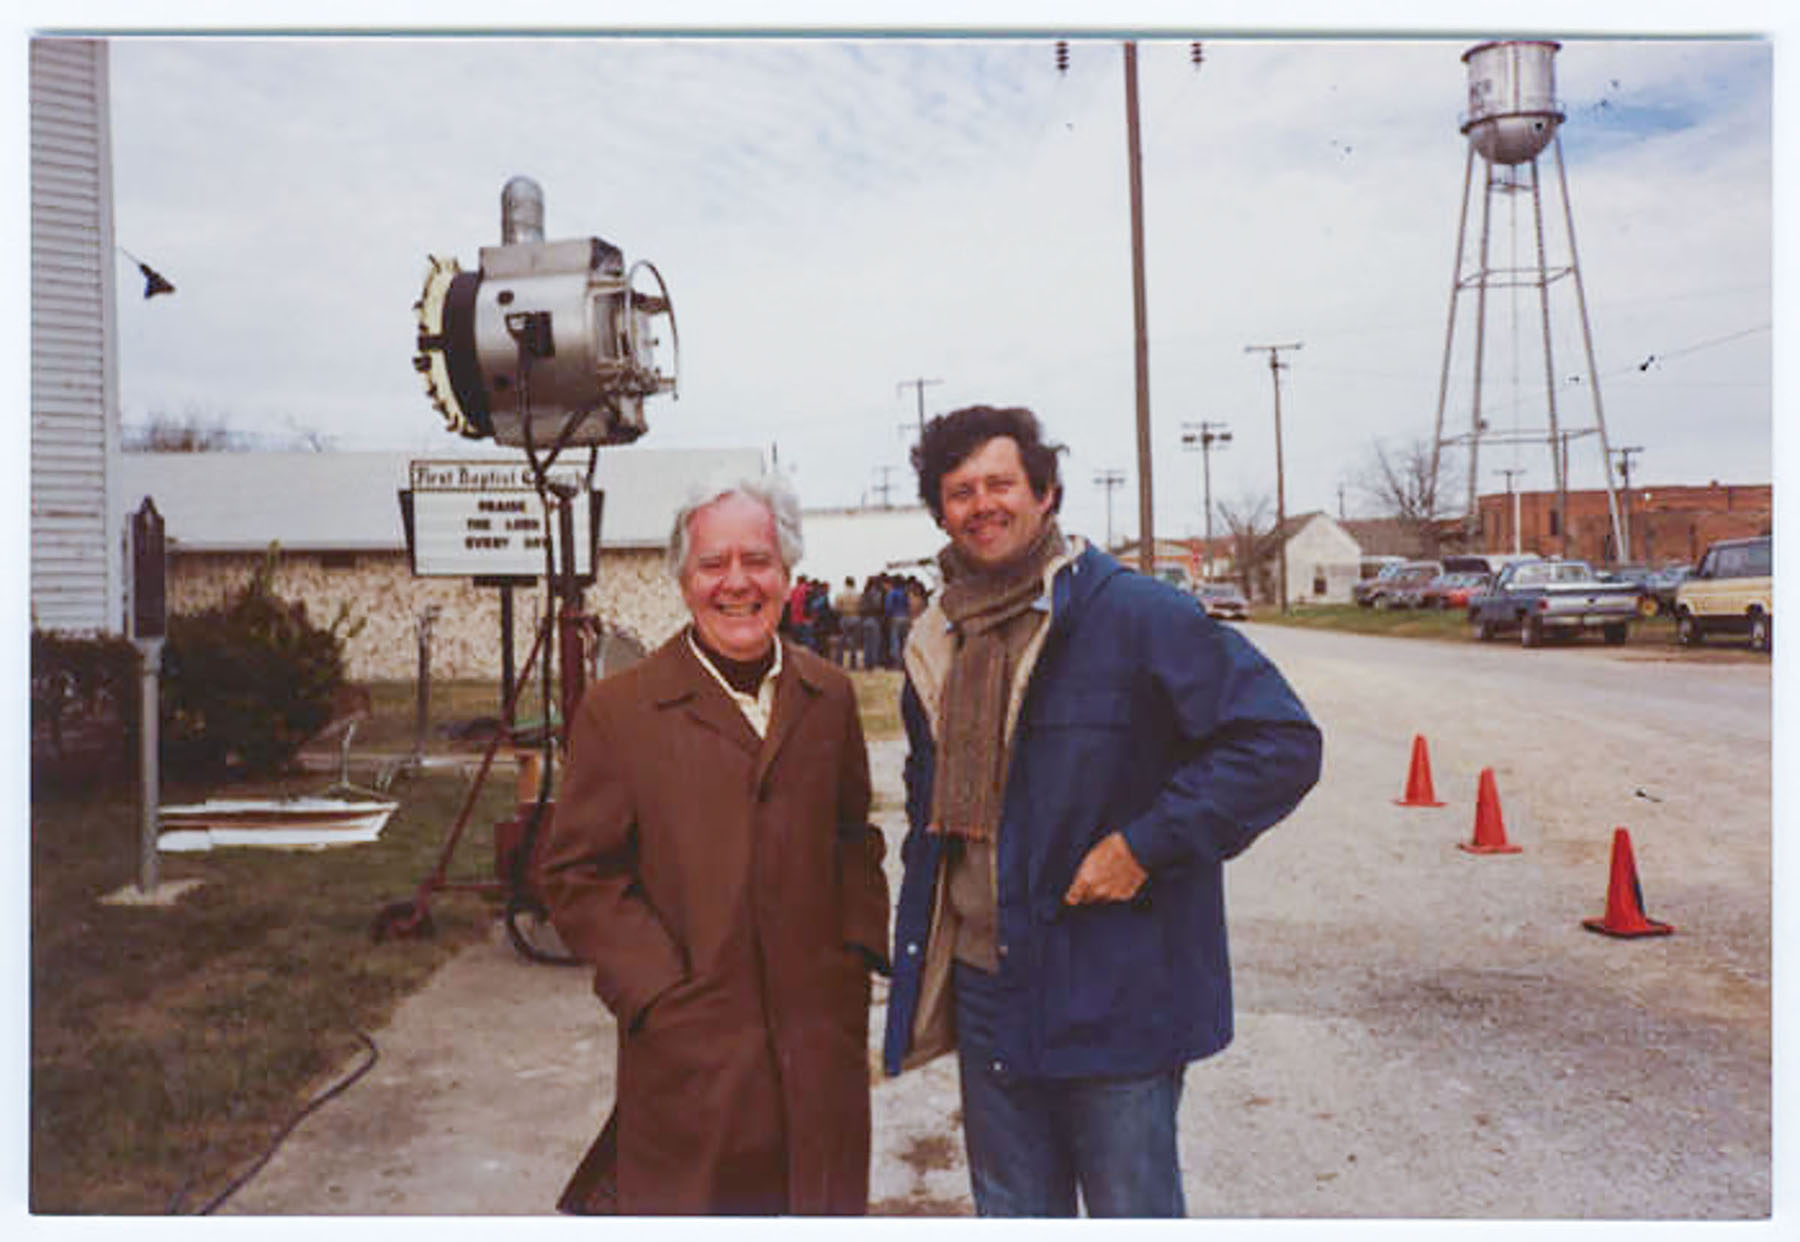 Two men in jackets stand smiling on a dirt road in a town